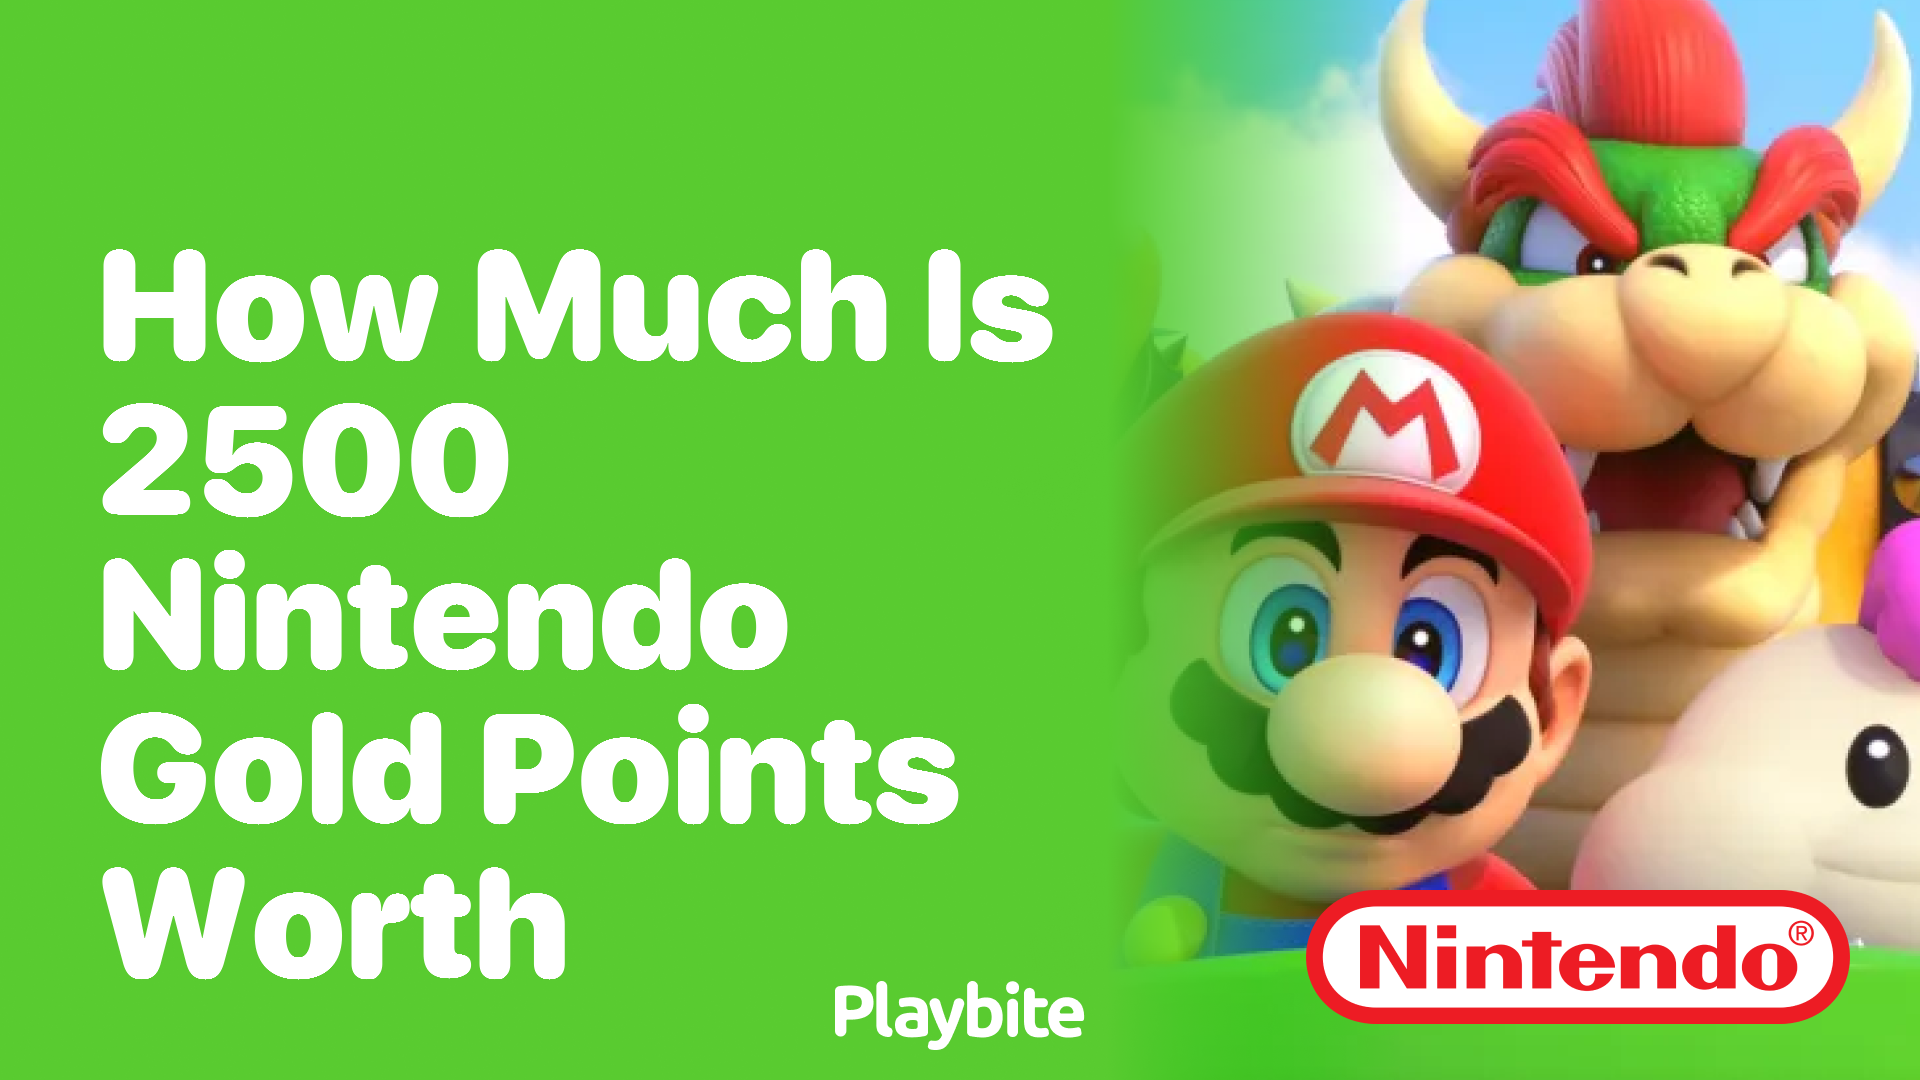 How Much Is 2500 Nintendo Gold Points Worth?